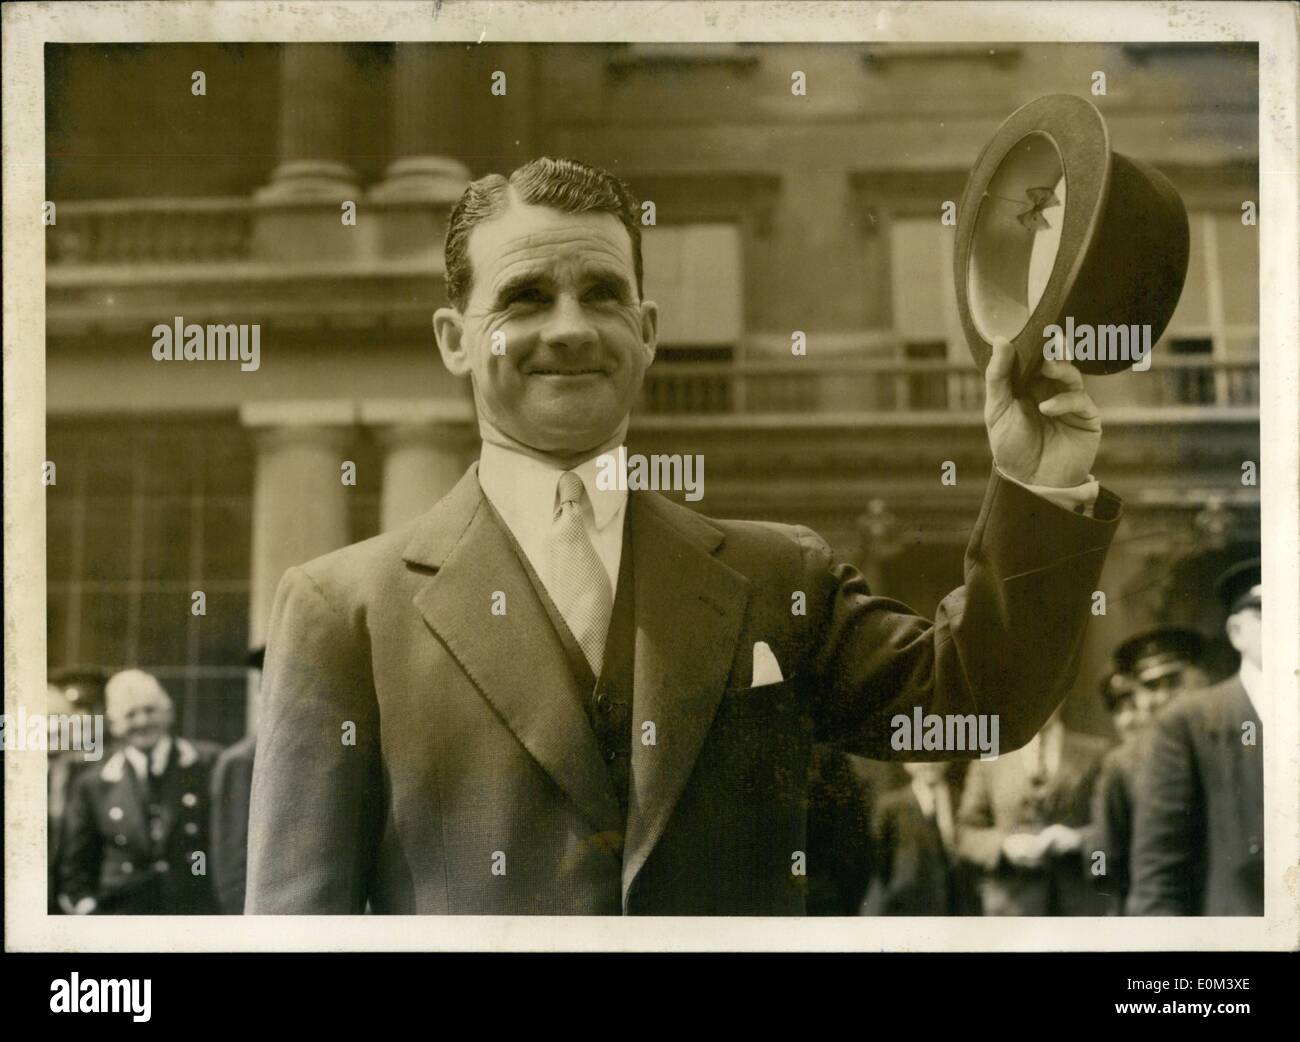 Jun. 06, 1953 - Sportsmen Knights Receive The Accolade: Champion jockey Gordon Richards and retired cricketer Jack Hobbs were among the record number of newly created knights to receive the accolade from H.M.the Queen at Buckingham Palace today. Photo Shows: Champion jockey Sir Gordon Richards waves his hat as he leaves Buckingham Palace this afternoon. after being knighted by H.M. The Queen. Stock Photo